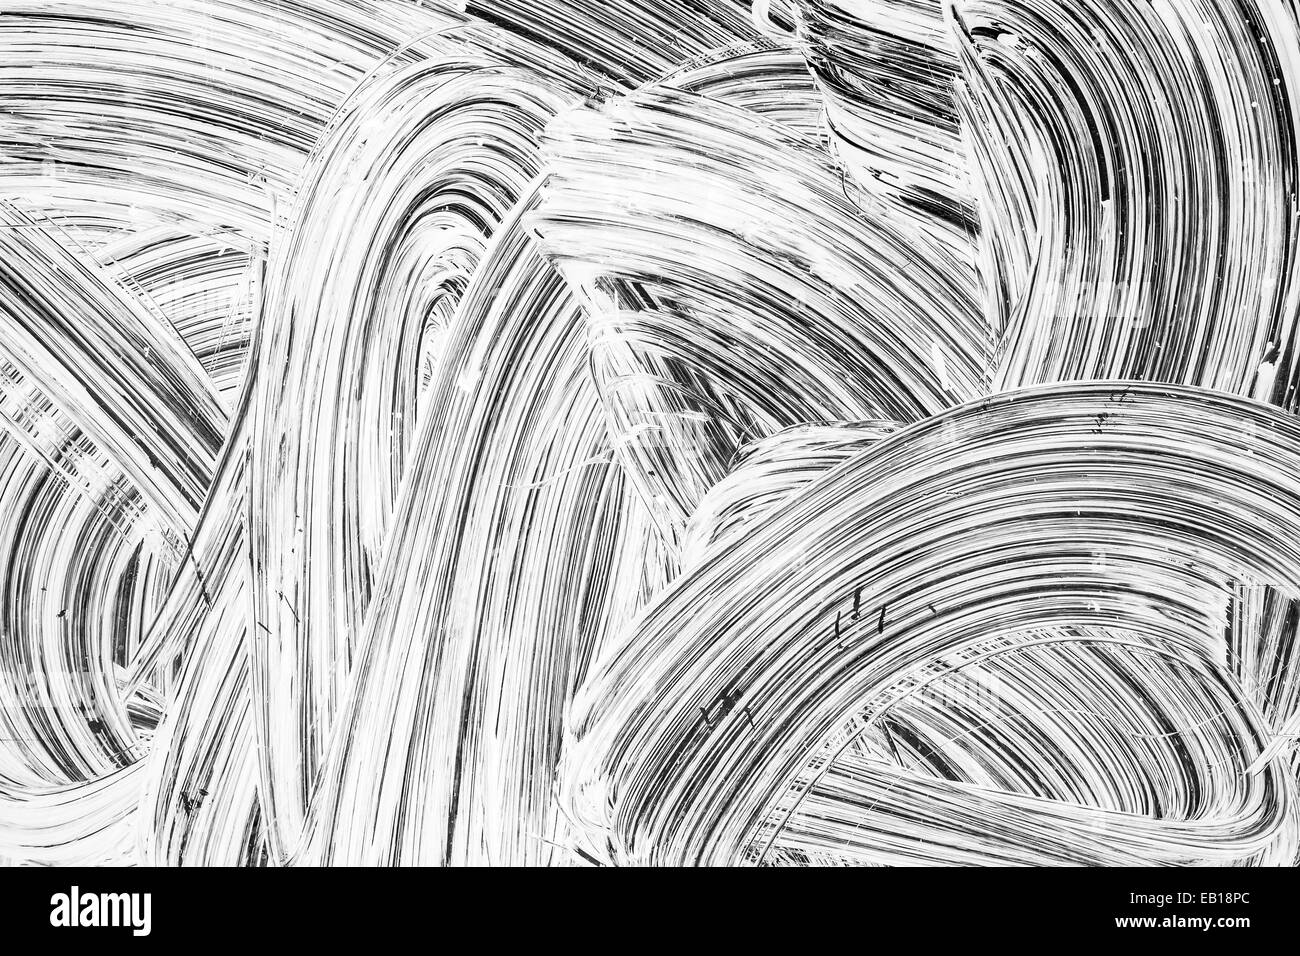 Abstract renovation background texture, white paint pattern over dark glass Stock Photo